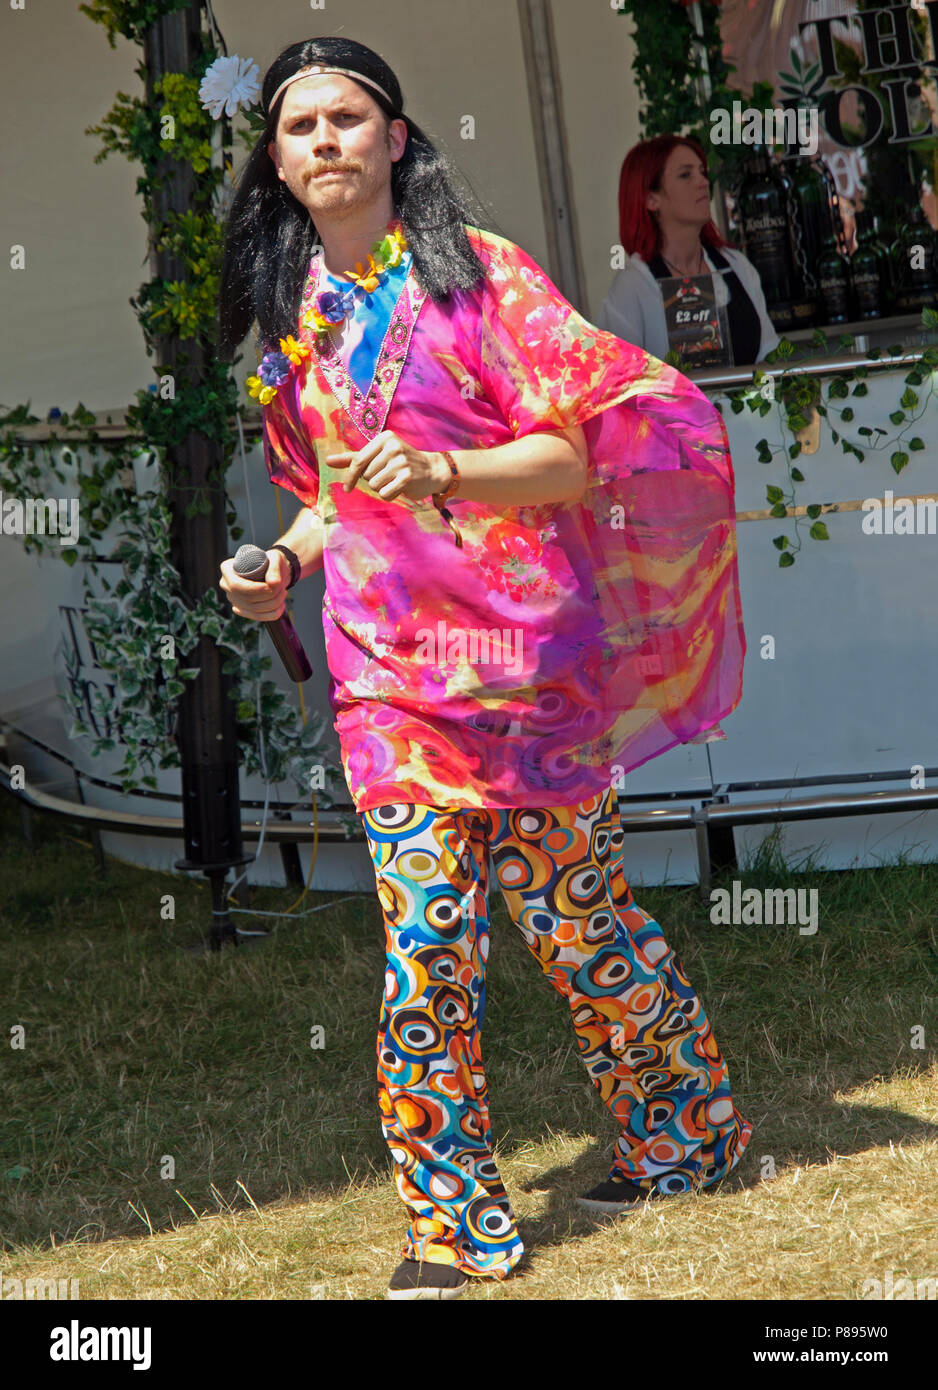 https://c8.alamy.com/comp/P895W0/dressed-in-hippy-clothes-a-man-enjoys-himself-at-love-supreme-P895W0.jpg